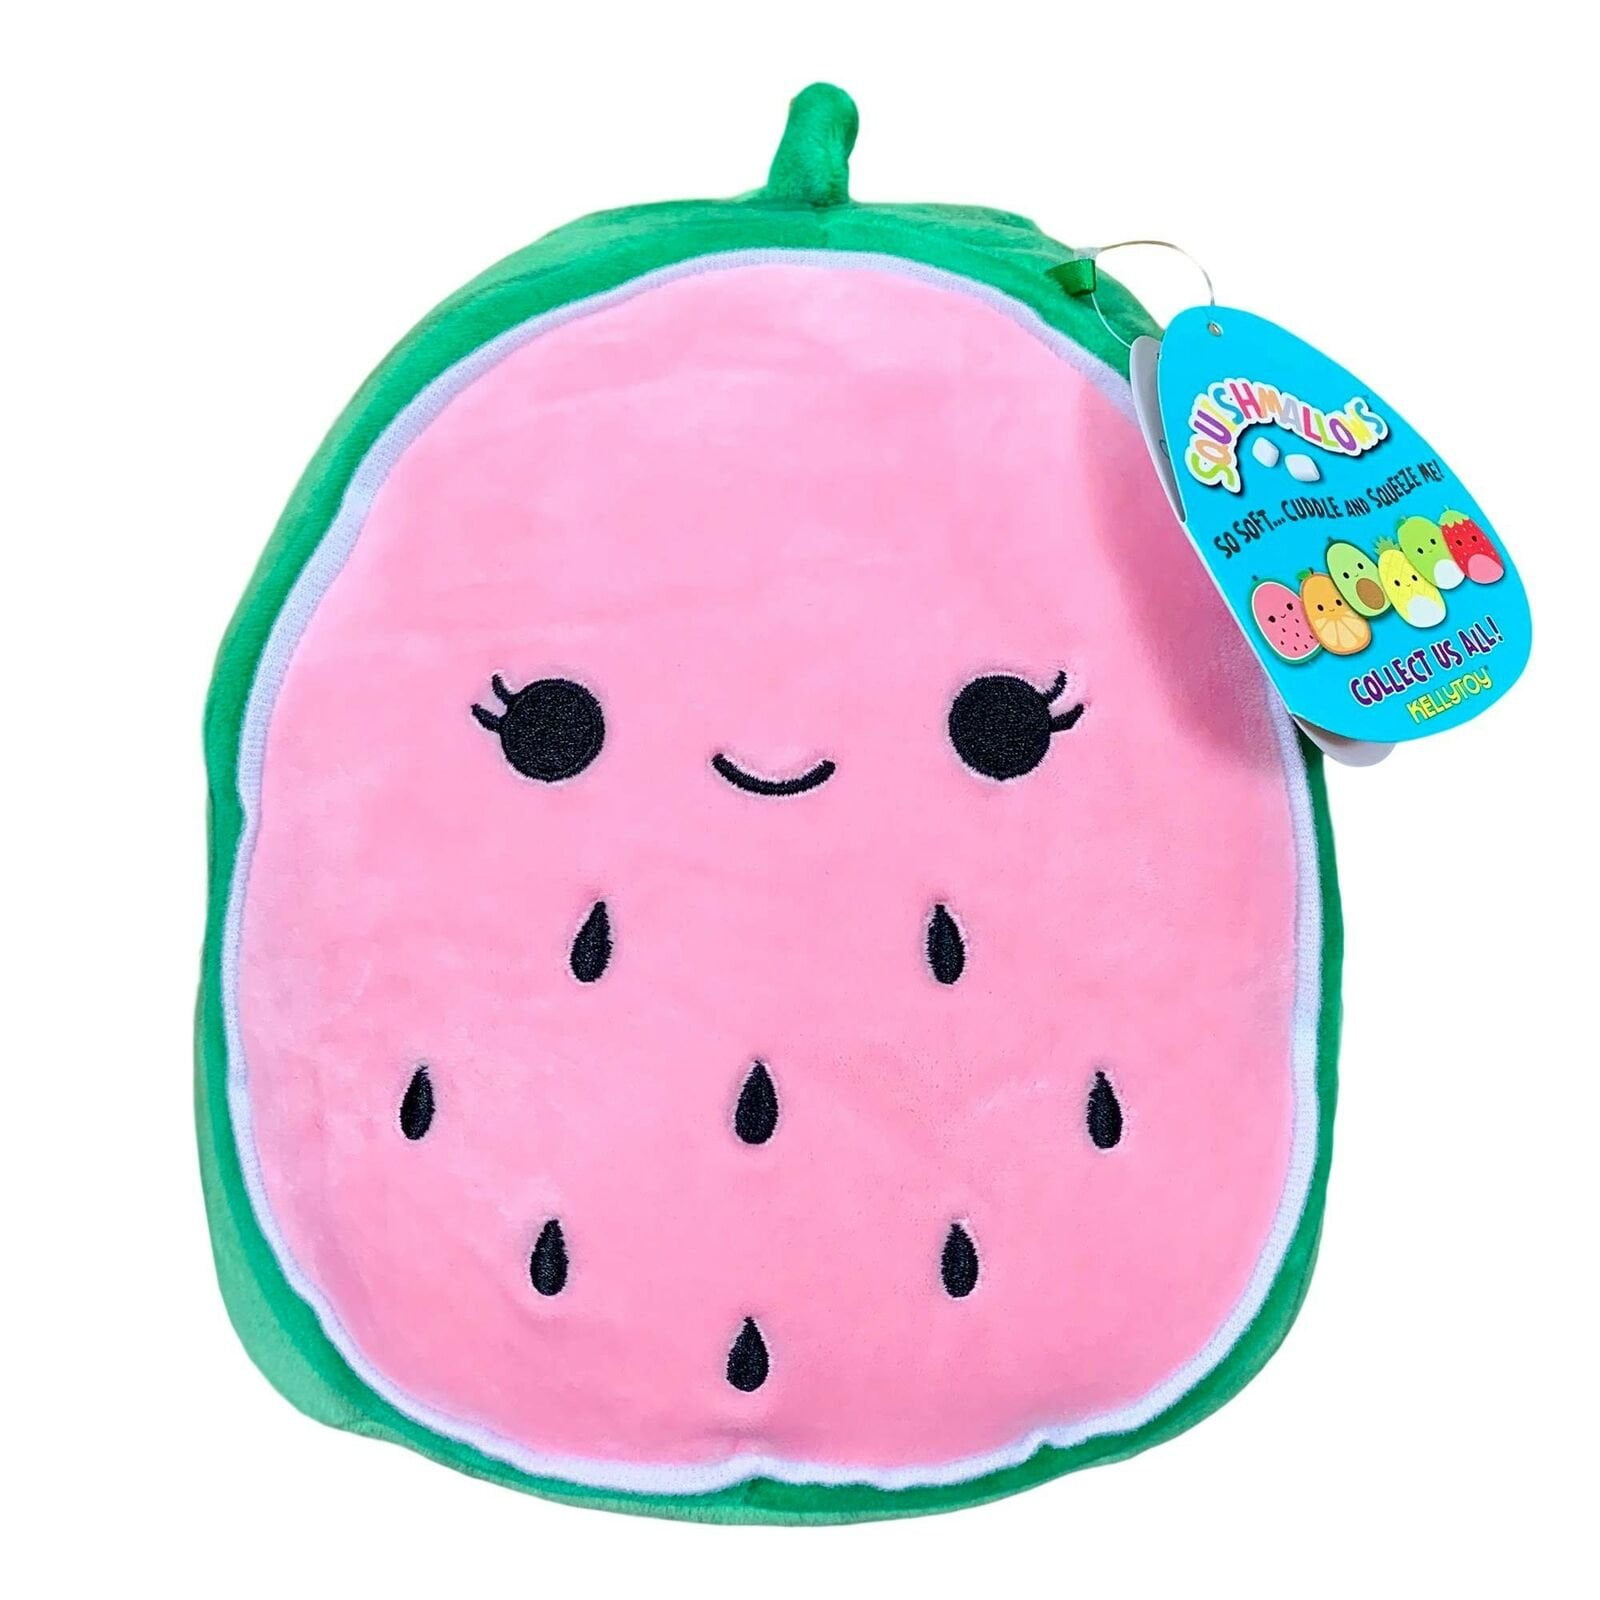 Squishmallows Wyatt the Watermelon 8" Fruit Squad NEW IN HAND FAST SHIPPING